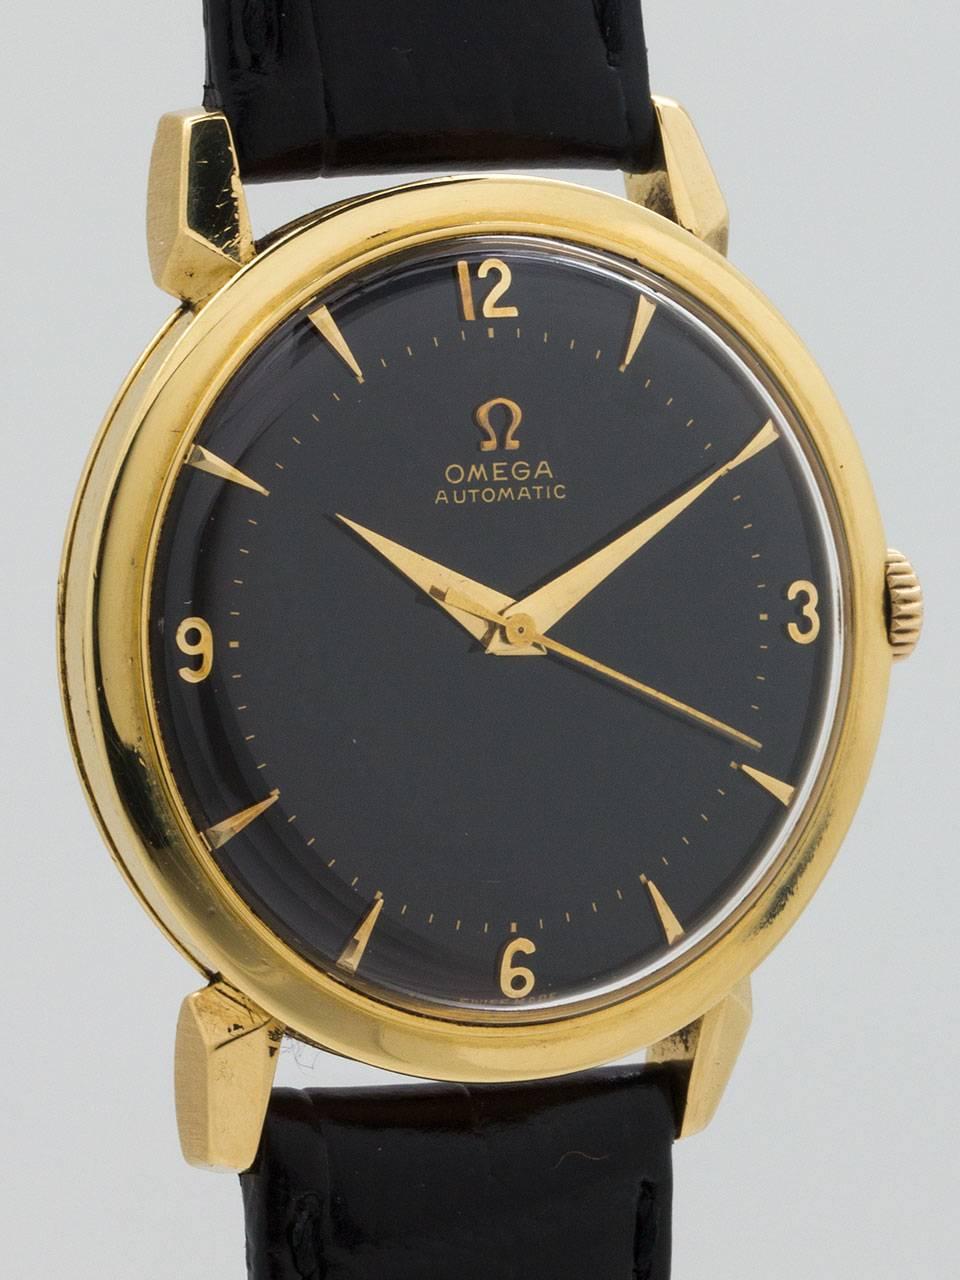 Omega 18K Yellow Gold Dress Wristwatch ref 2710 SC circa 1950’s. Featuring 35 X 42mm case with extended horn lugs and acrylic crystal. Beautiful condition black original dial with gold applied indexes, applied Omega logo, and tapered gilt hands.